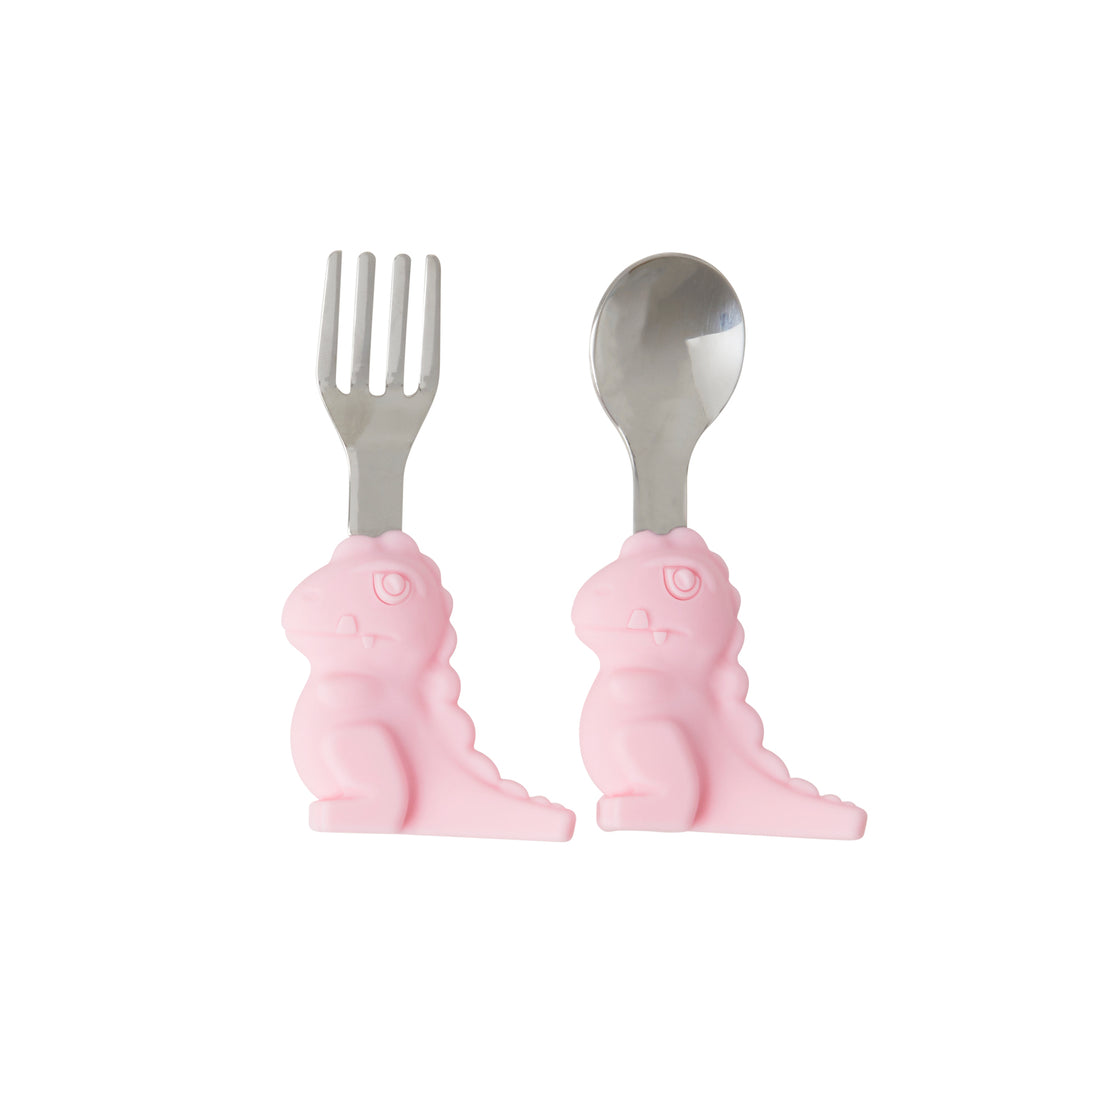 rice-dk-stainless-steel-kids-cutlery-with-dino-handle-pink-rice-babsf-medini-